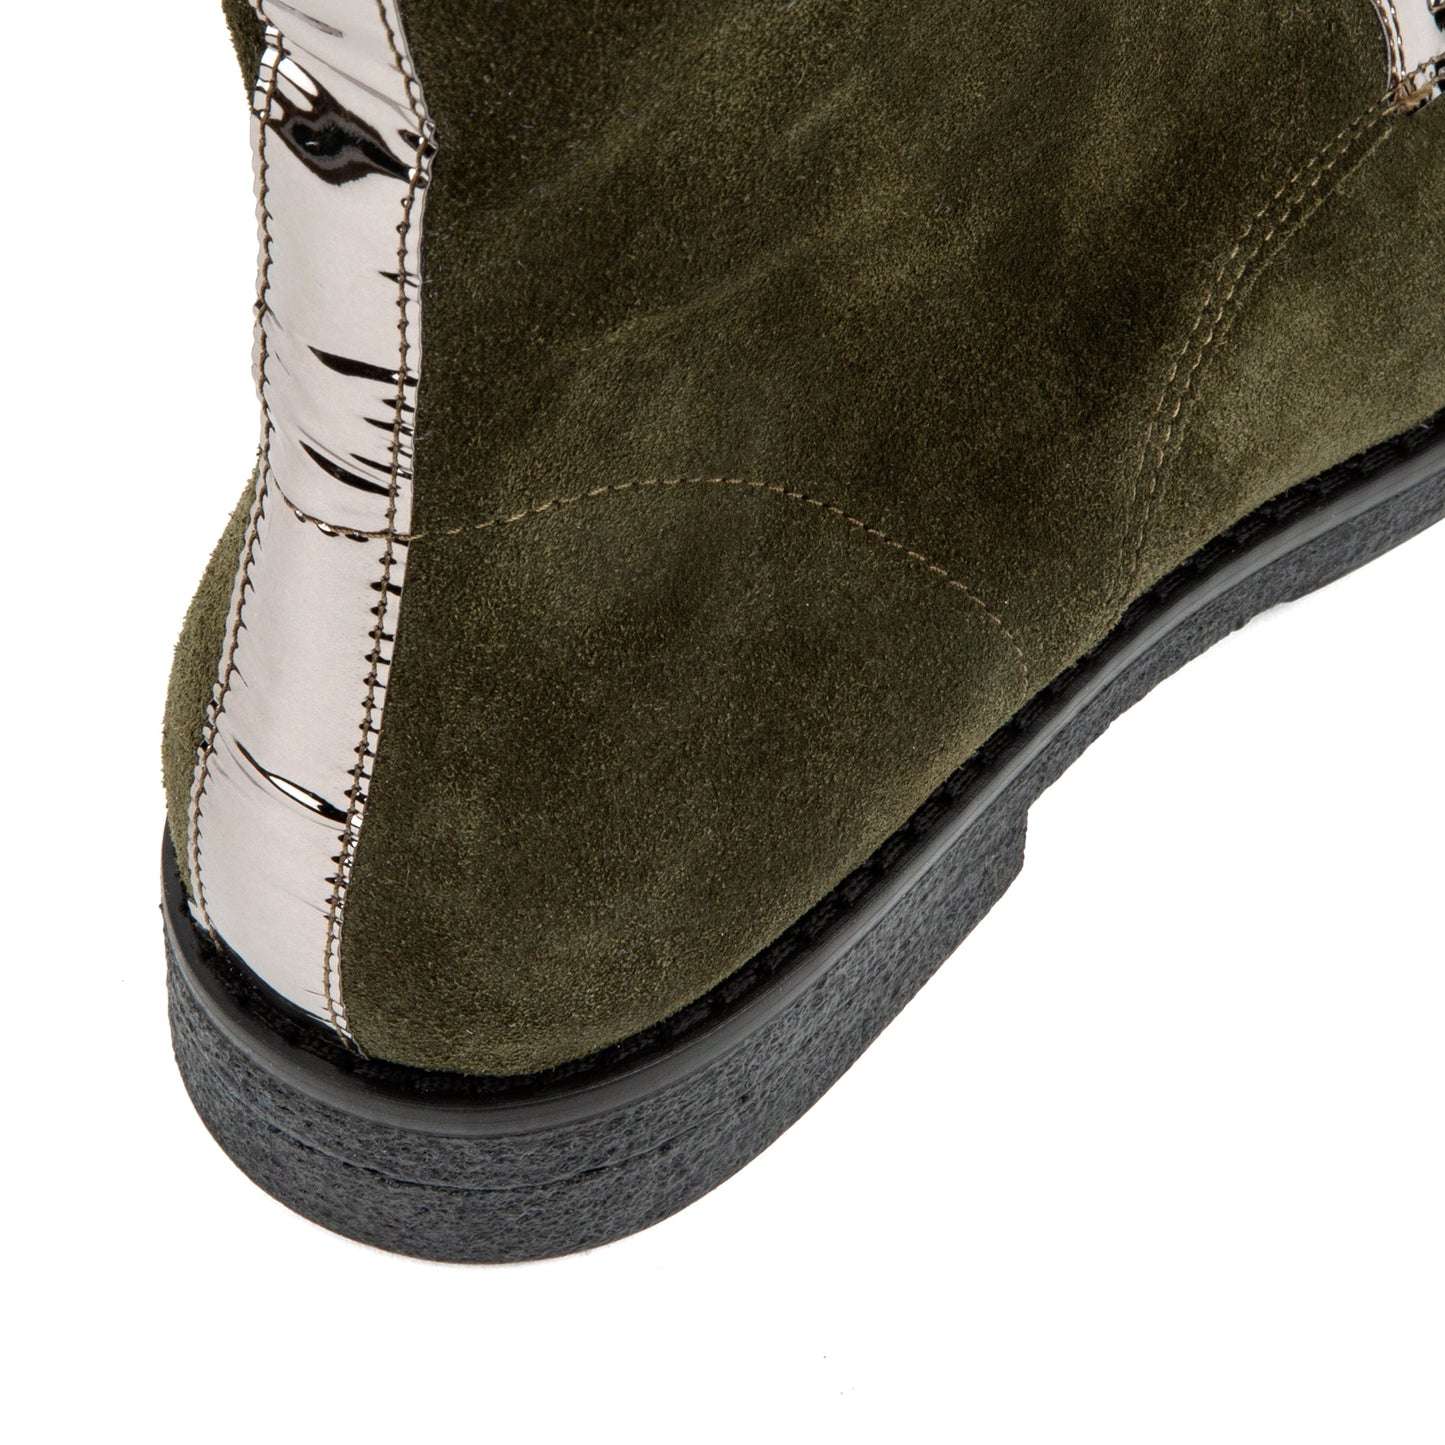 Traveller - Olive Ankle Boots Embassy London 